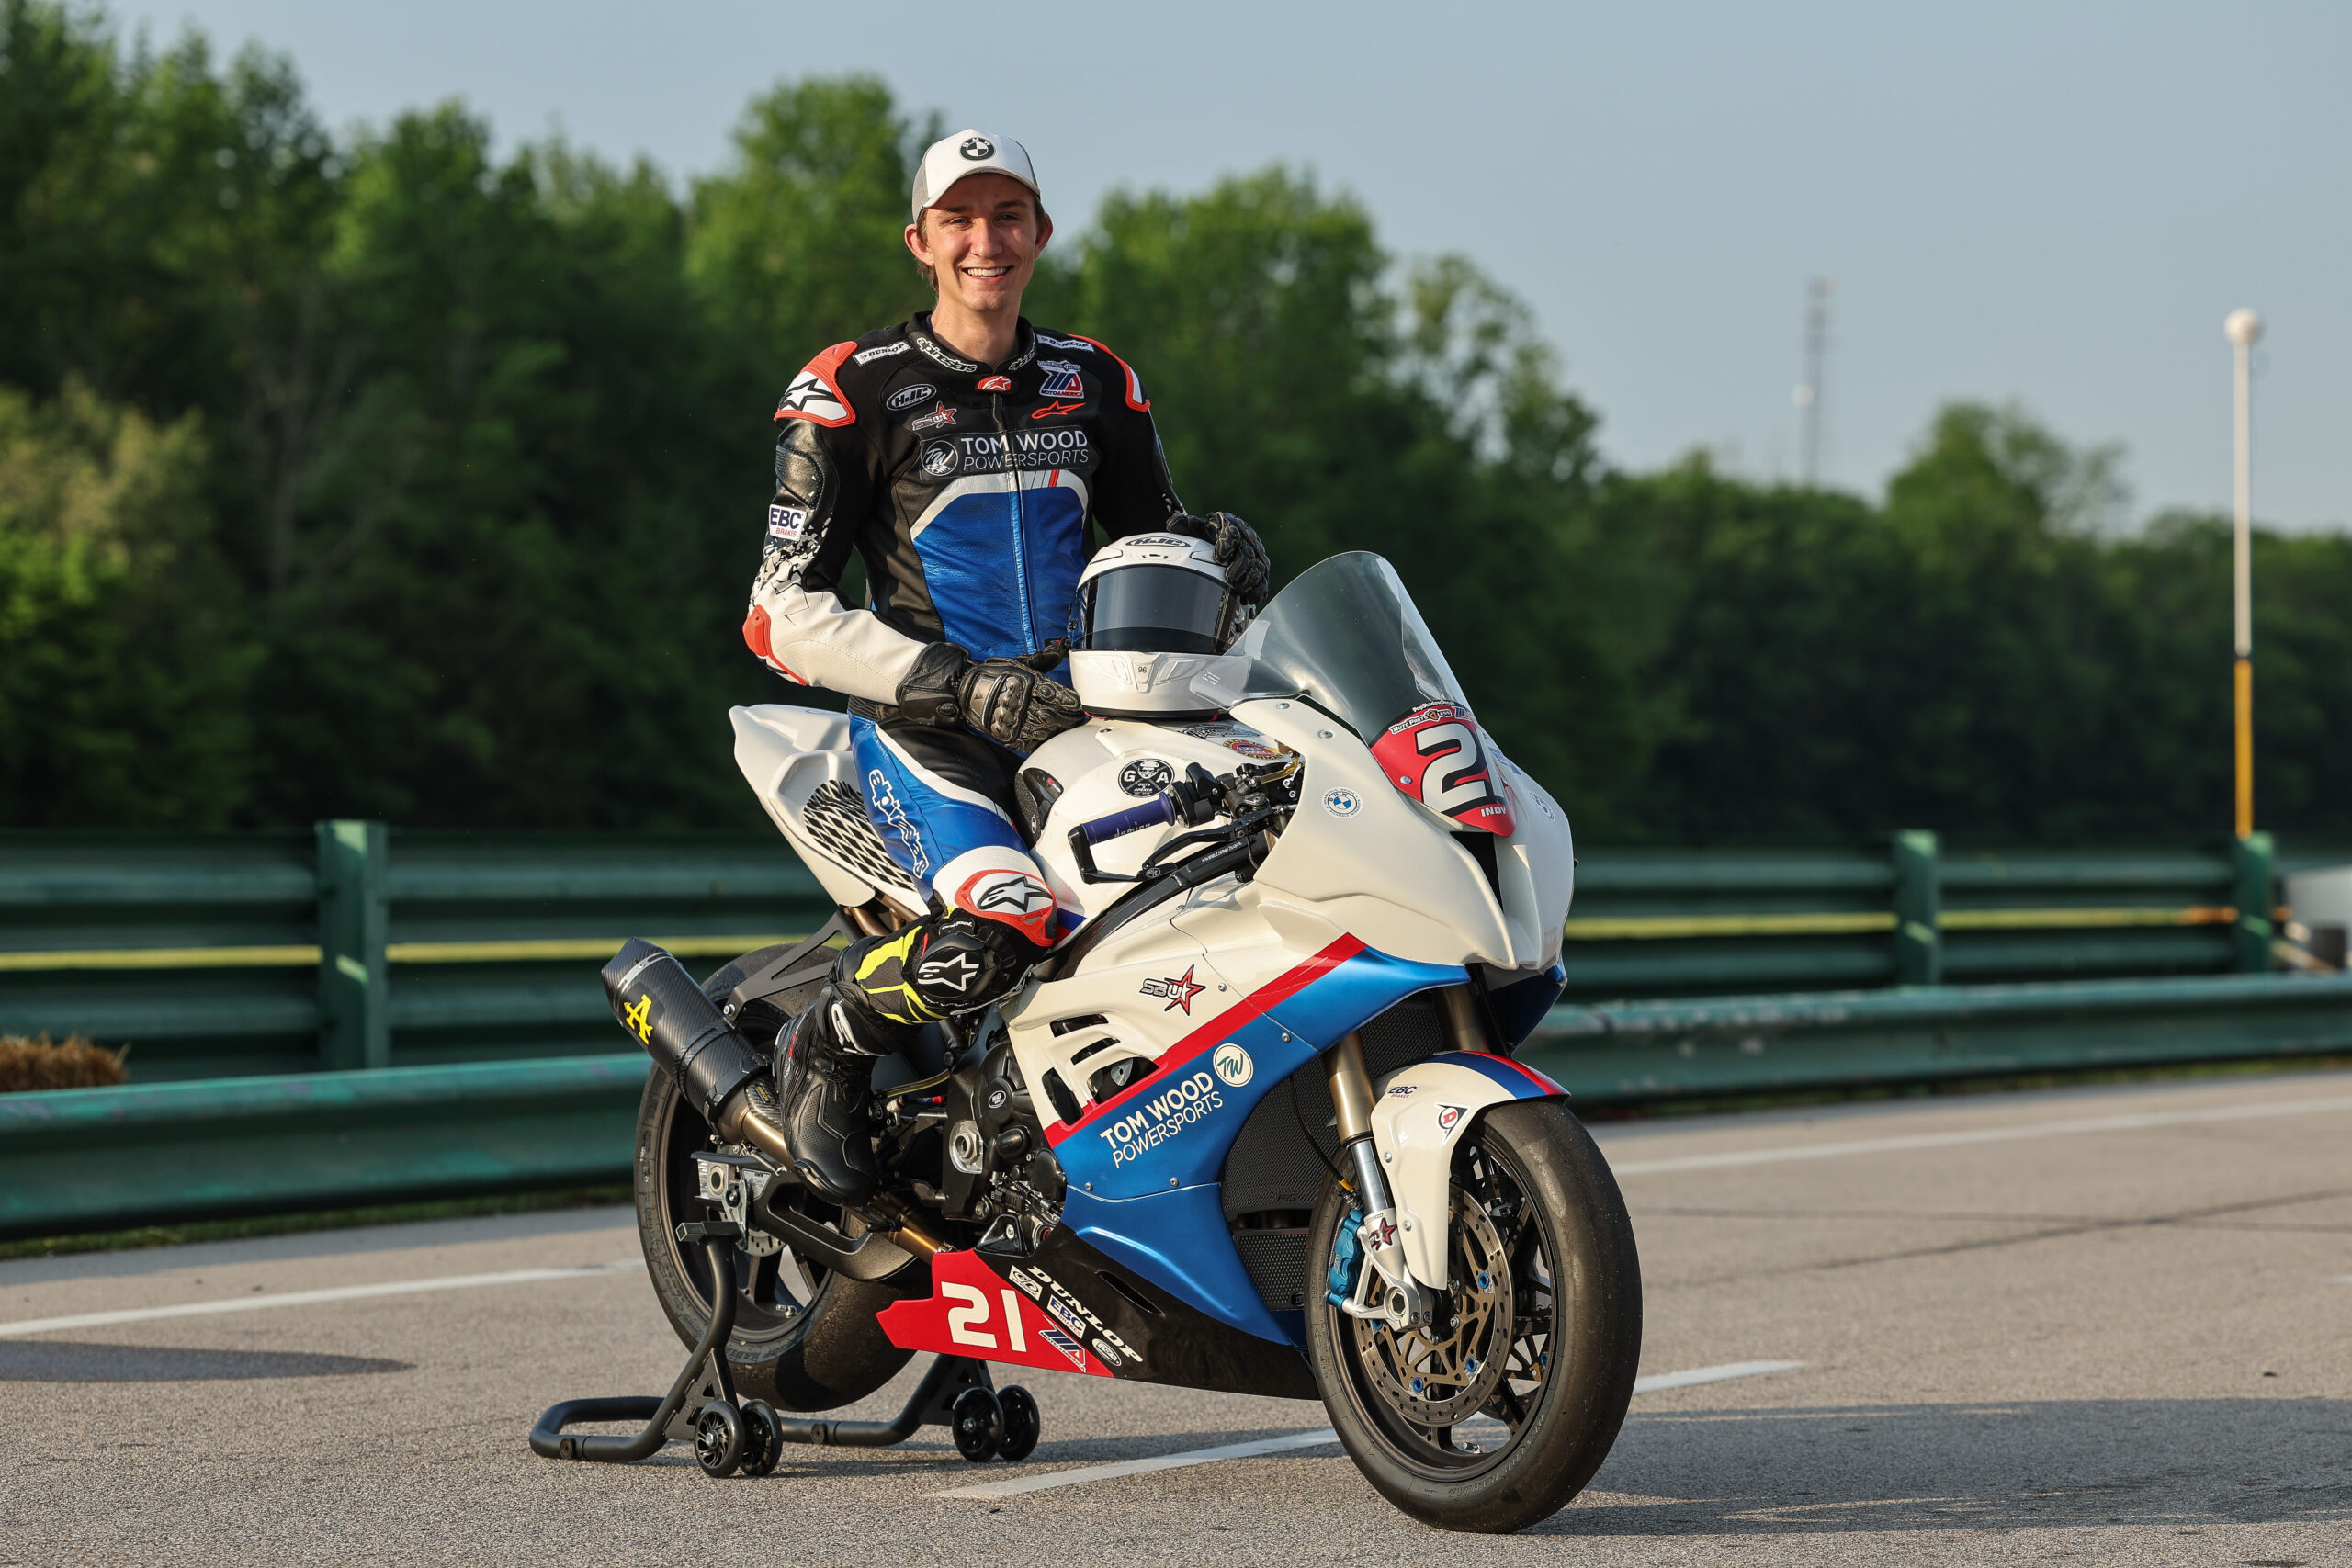 Racing A BMW S1000rr From A 600 | My Lessons Pro Road Racing | Tom Wood Powersports - Nolan 